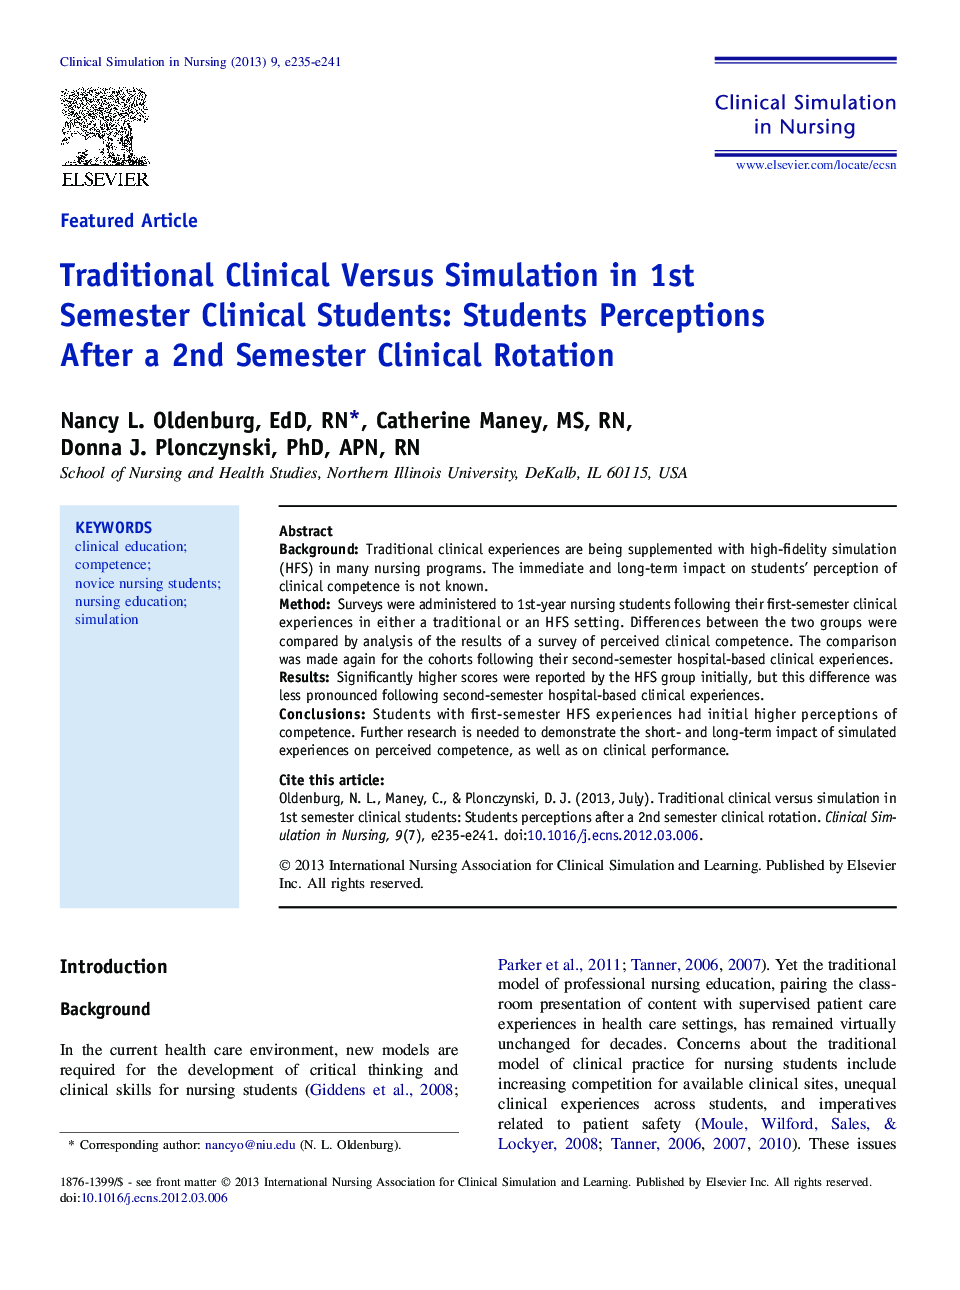 Traditional Clinical Versus Simulation in 1st Semester Clinical Students: Students Perceptions After a 2nd Semester Clinical Rotation